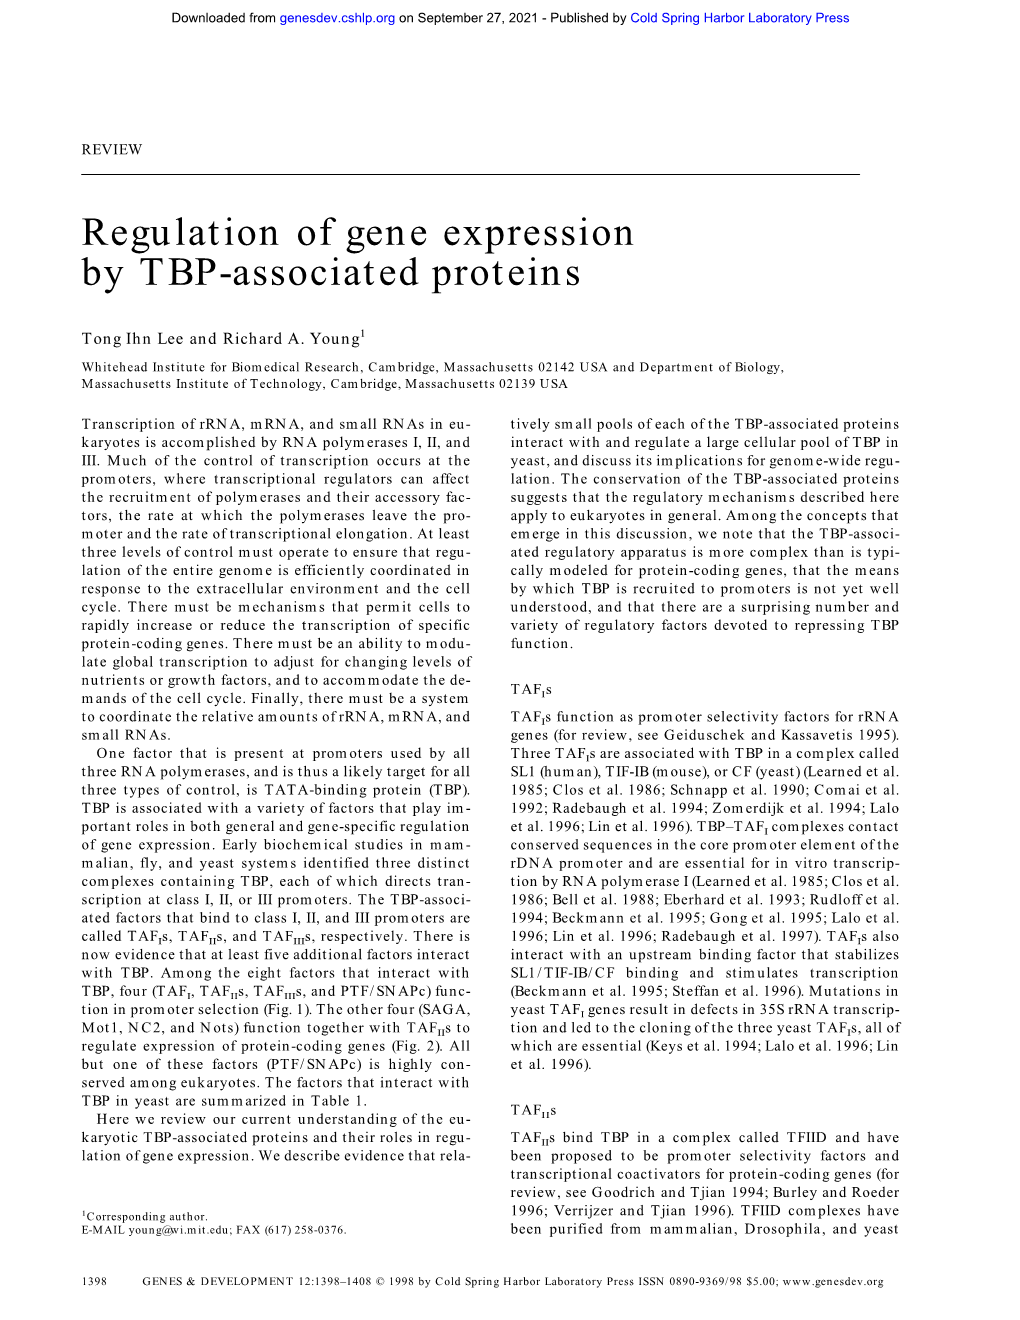 Regulation of Gene Expression by TBP-Associated Proteins